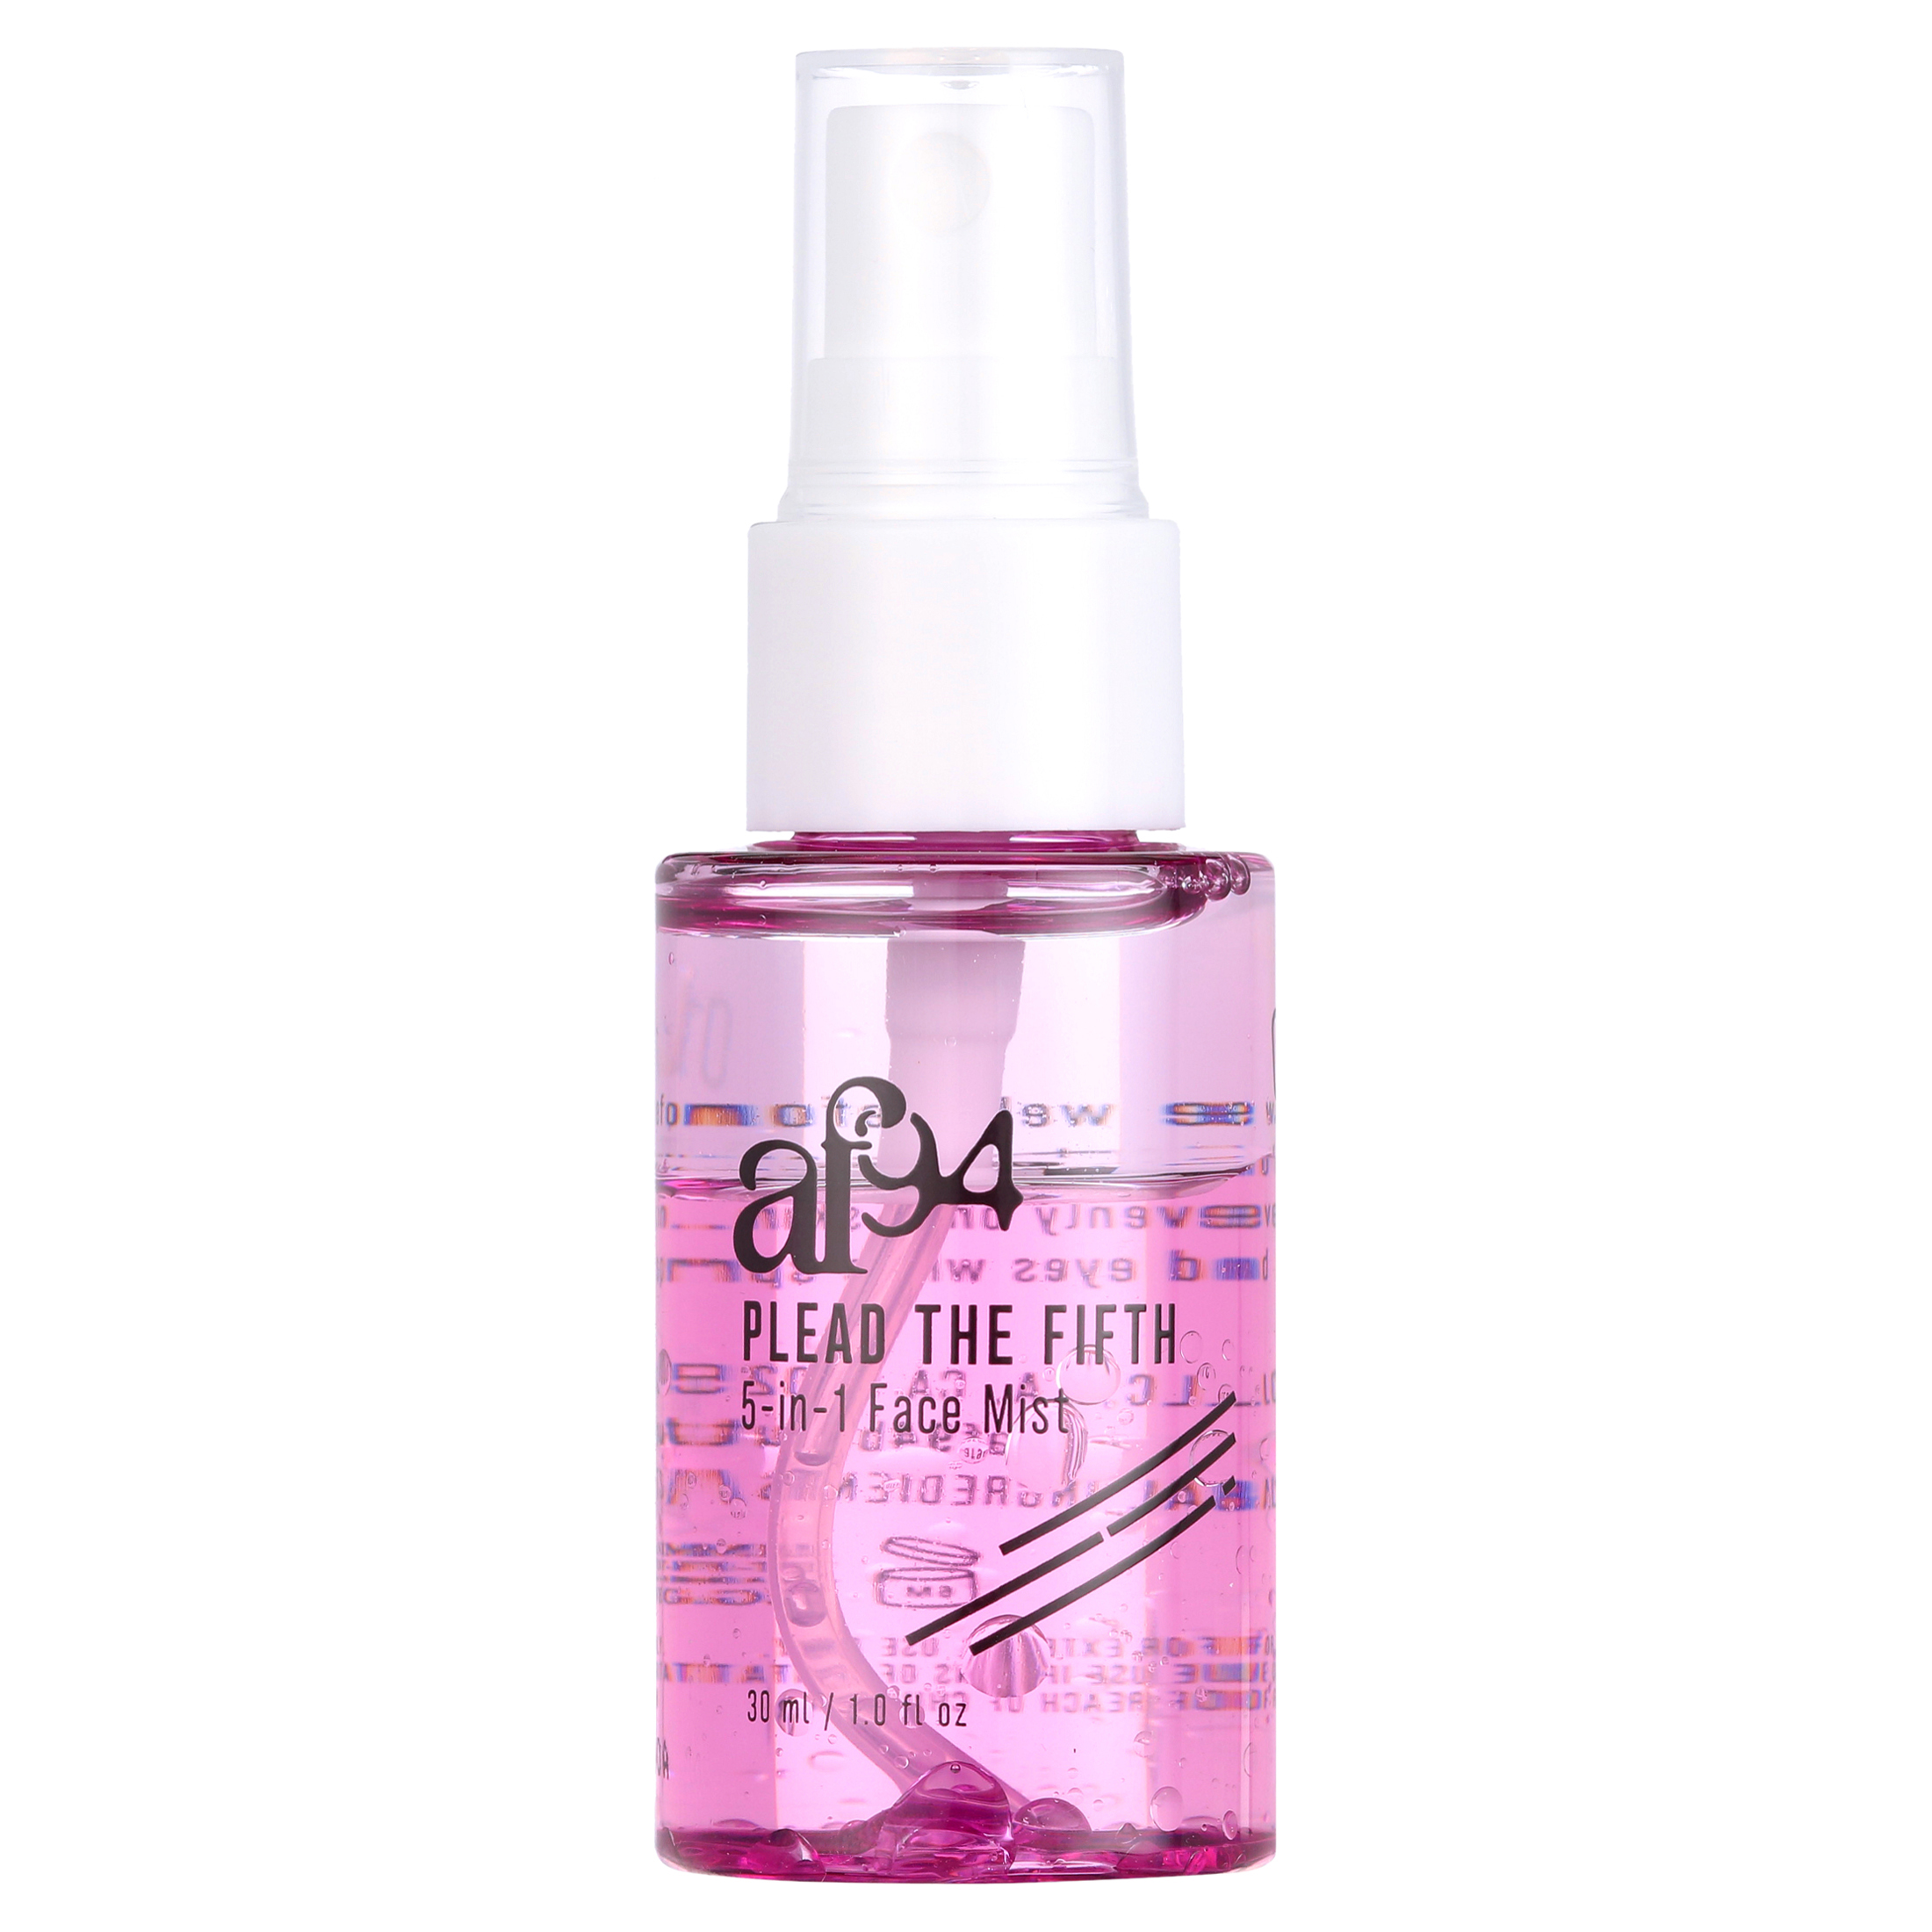 af94 Plead the Fifth 5-in-1 Face Mist, Hydrating & Illuminating, 1.0 fl oz - image 1 of 6